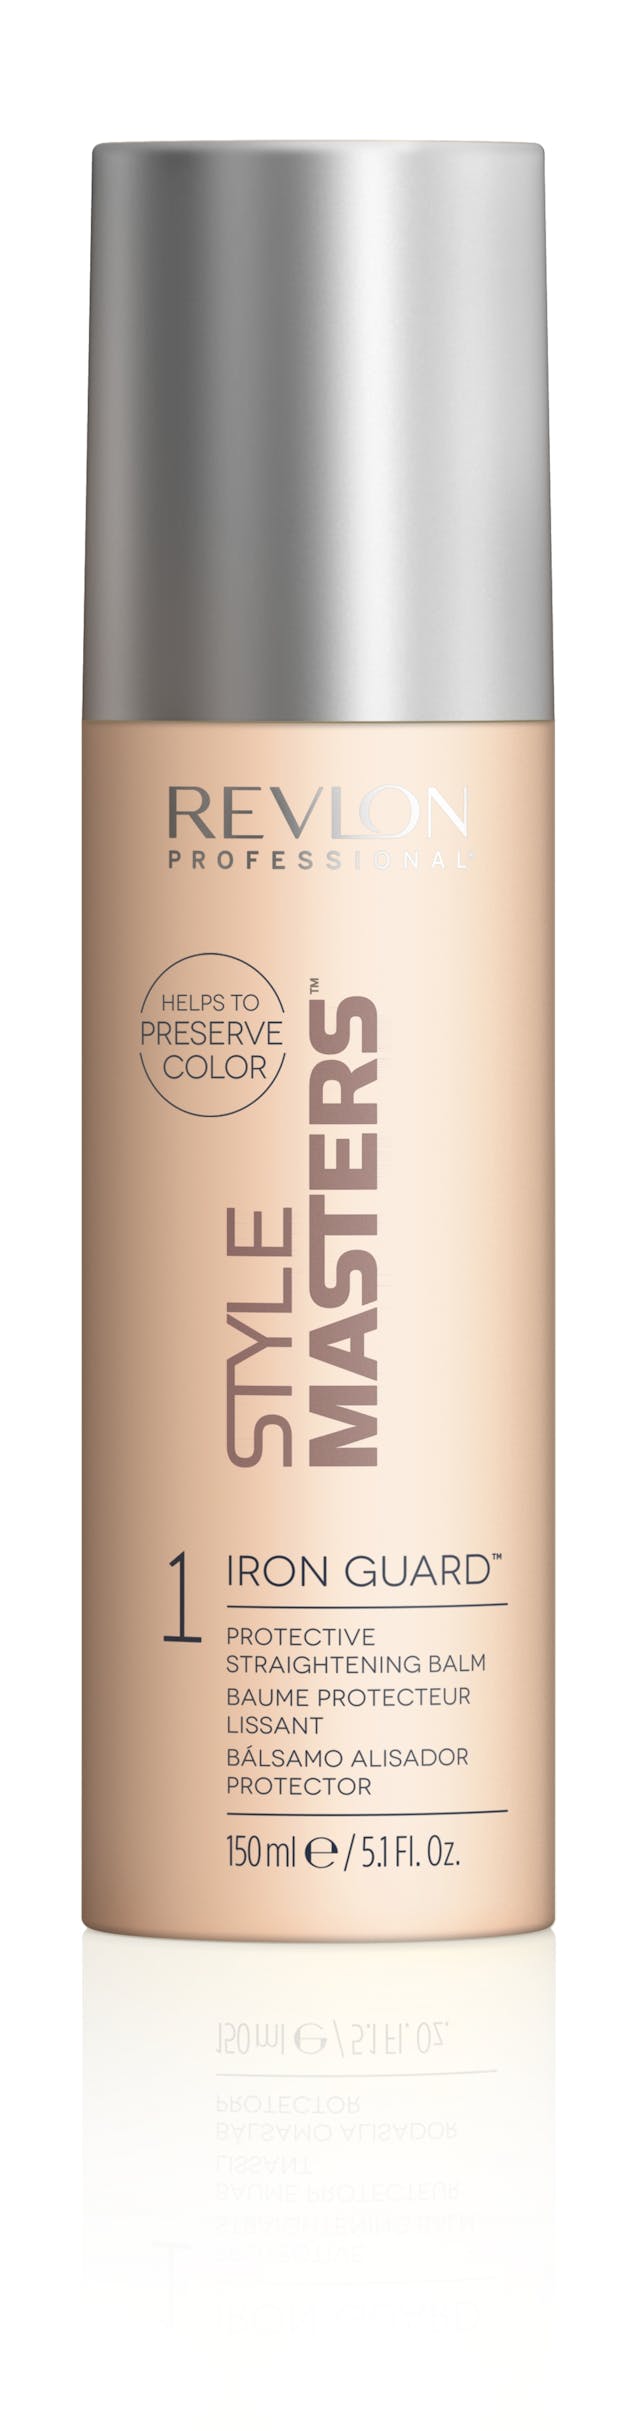 Style masters - Crème lissante protectrice_logo